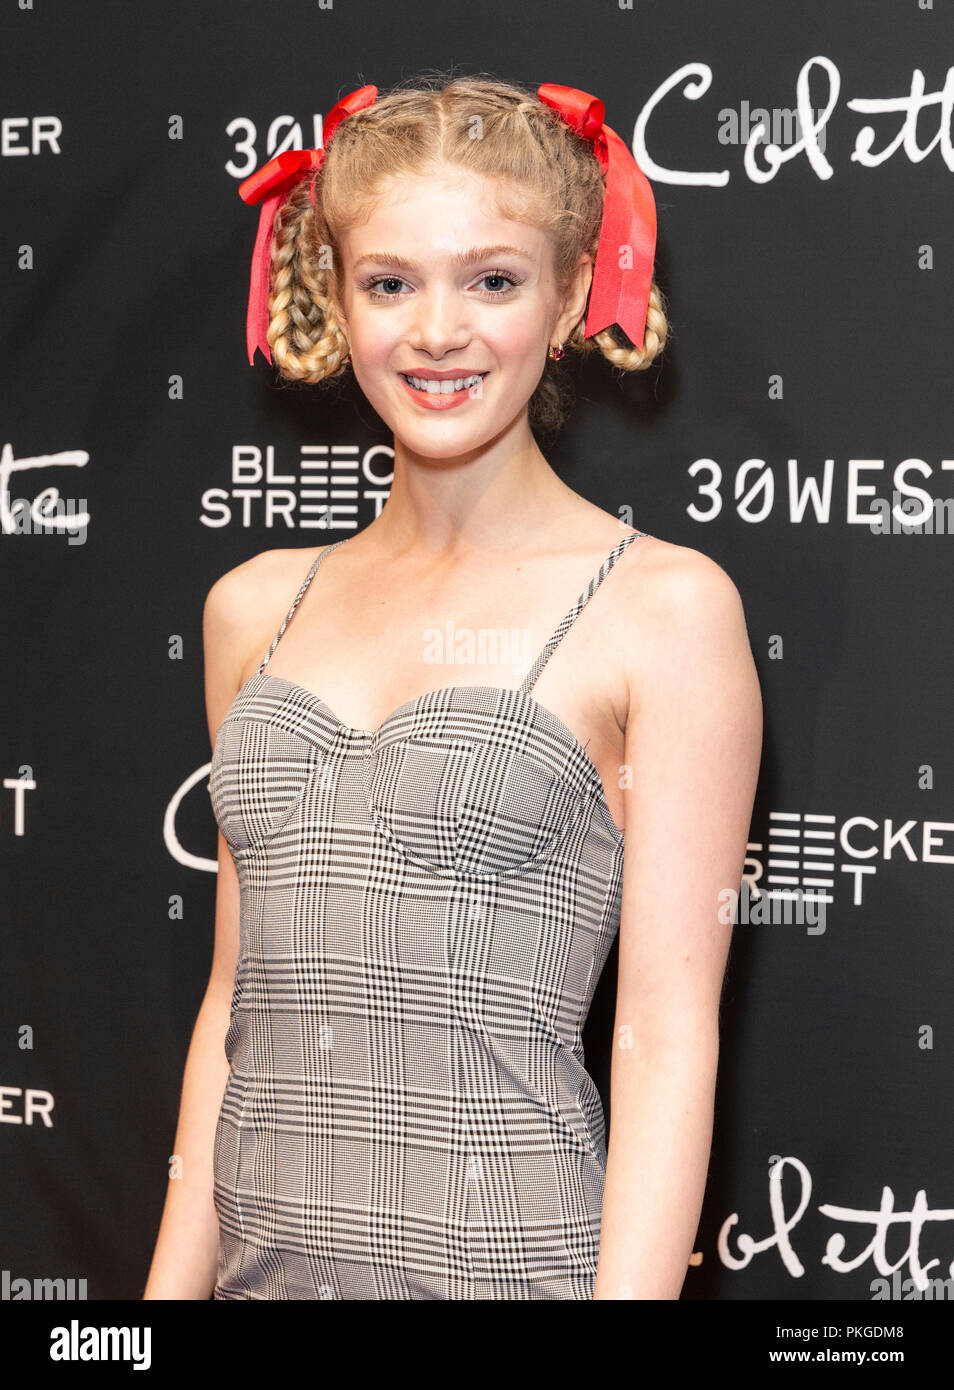 New York, USA - September 13, 2018: Elena Kampouris attends the New York screening of movie Colette at Museum of Modern Art Credit: lev radin/Alamy Live News Stock Photo